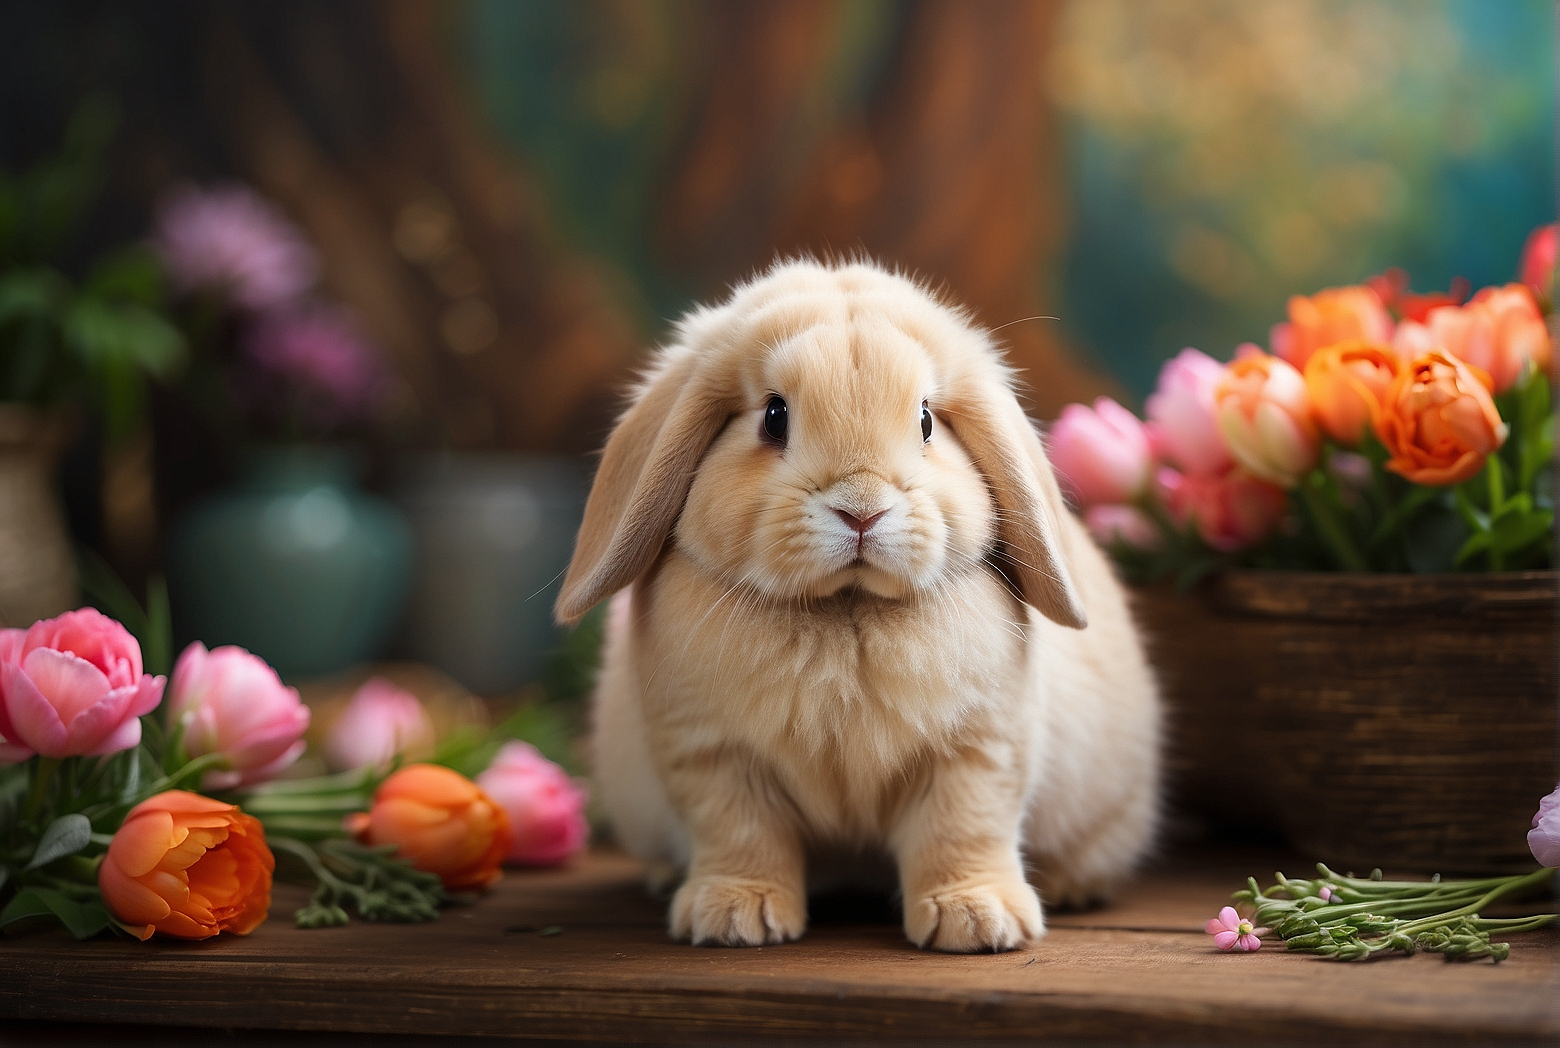 The Ultimate Guide: How to Take Care of a Holland Lop Bunny